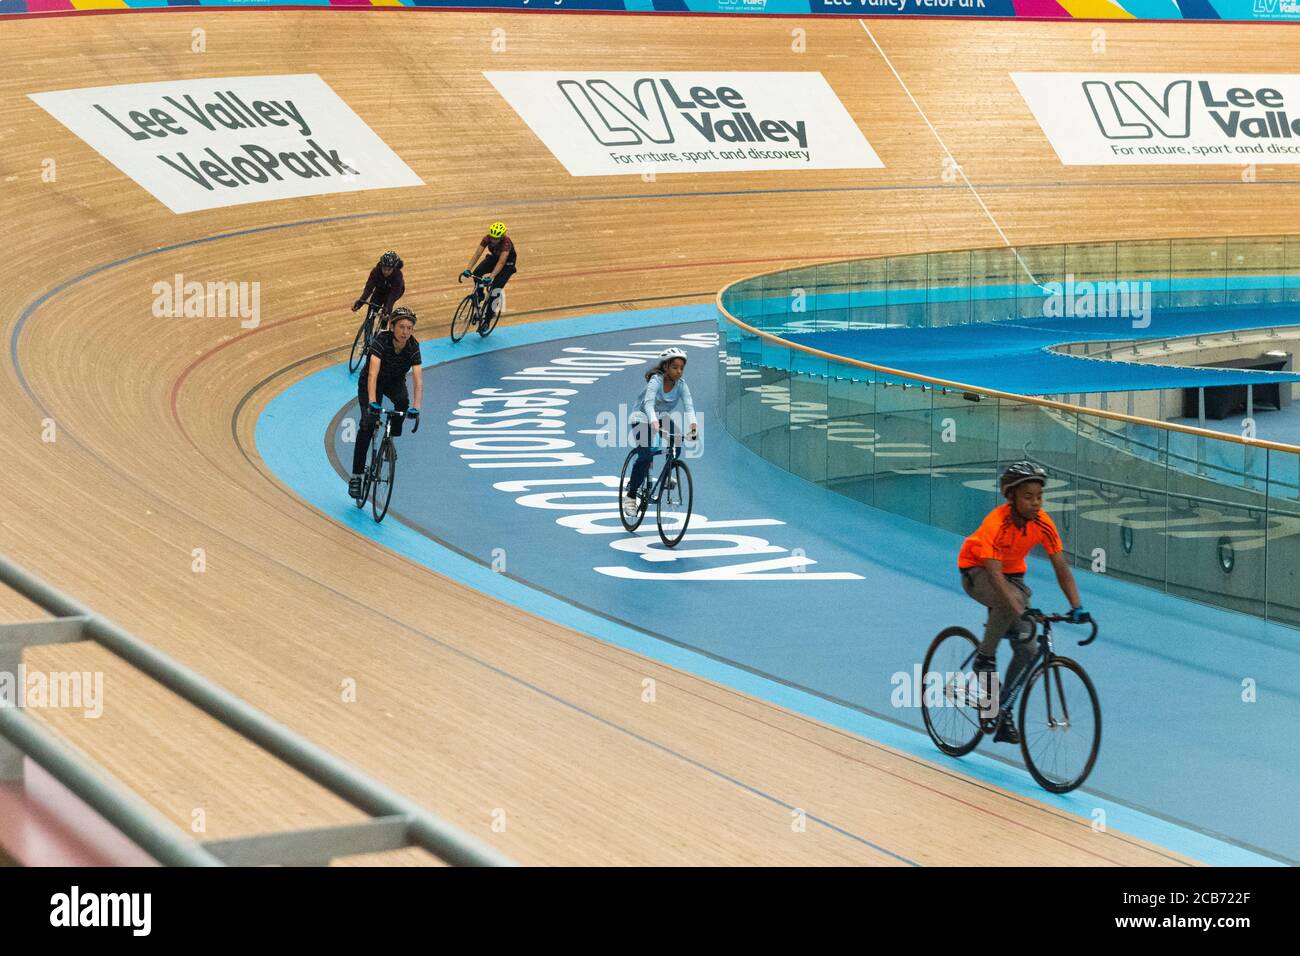 England London Stratford Hackney Wick Queen Elizabeth Park Olympic Lee Valley Velodrome VeloPark 250m indoor cycling track young cyclists iconic Stock Photo